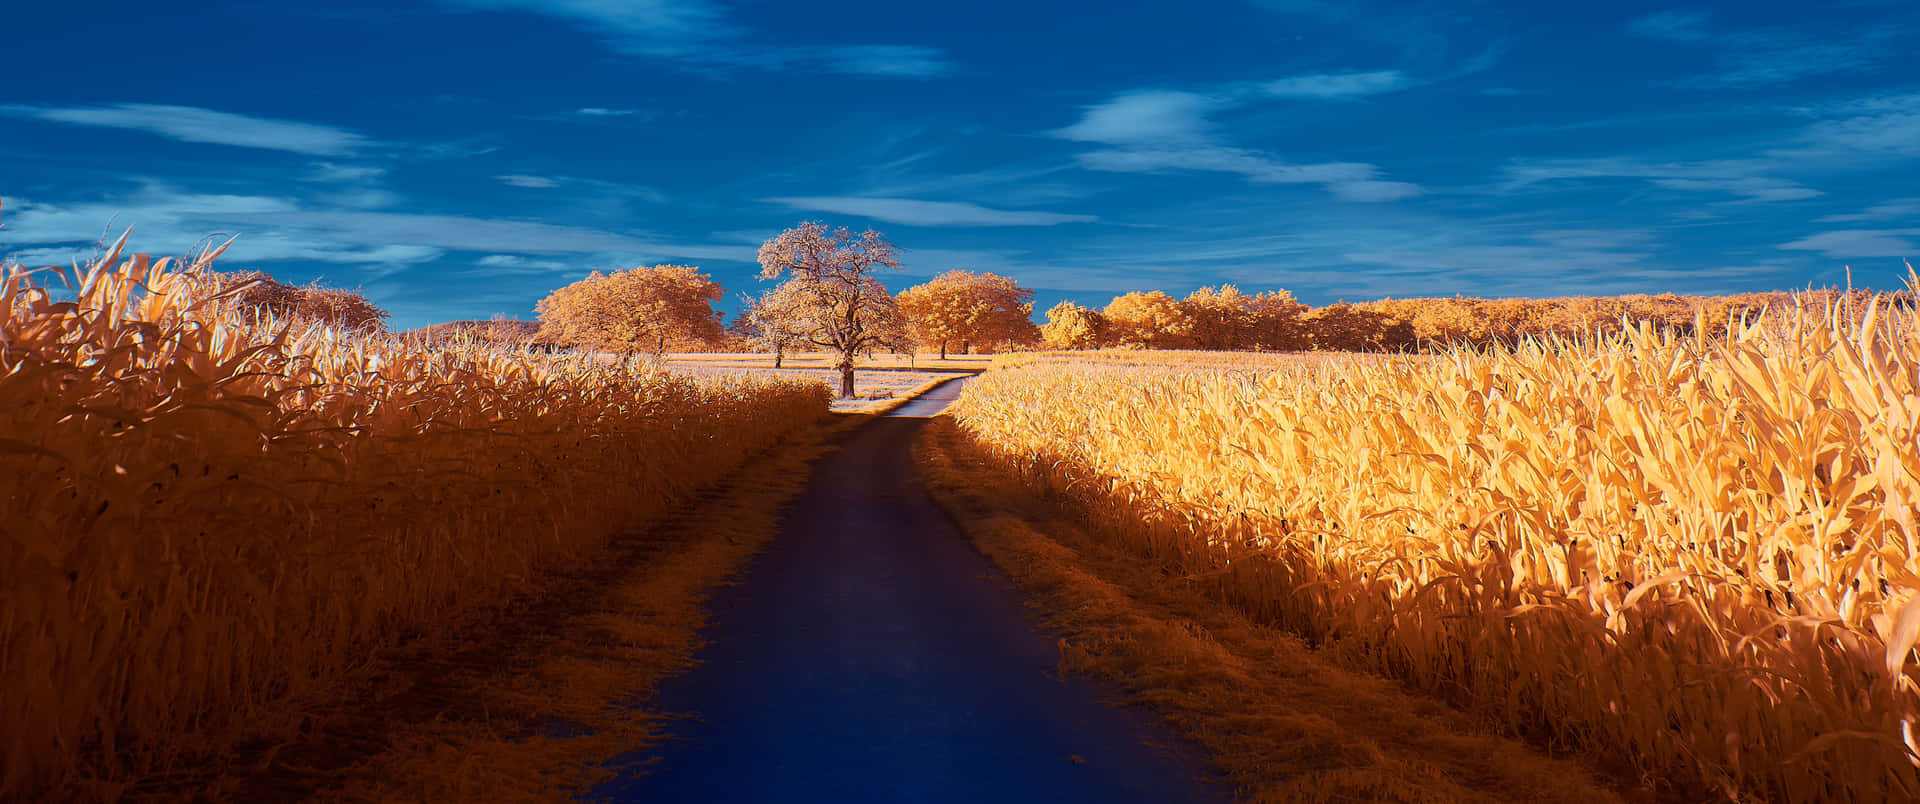 A scenic view of an autumn landscape. Wallpaper